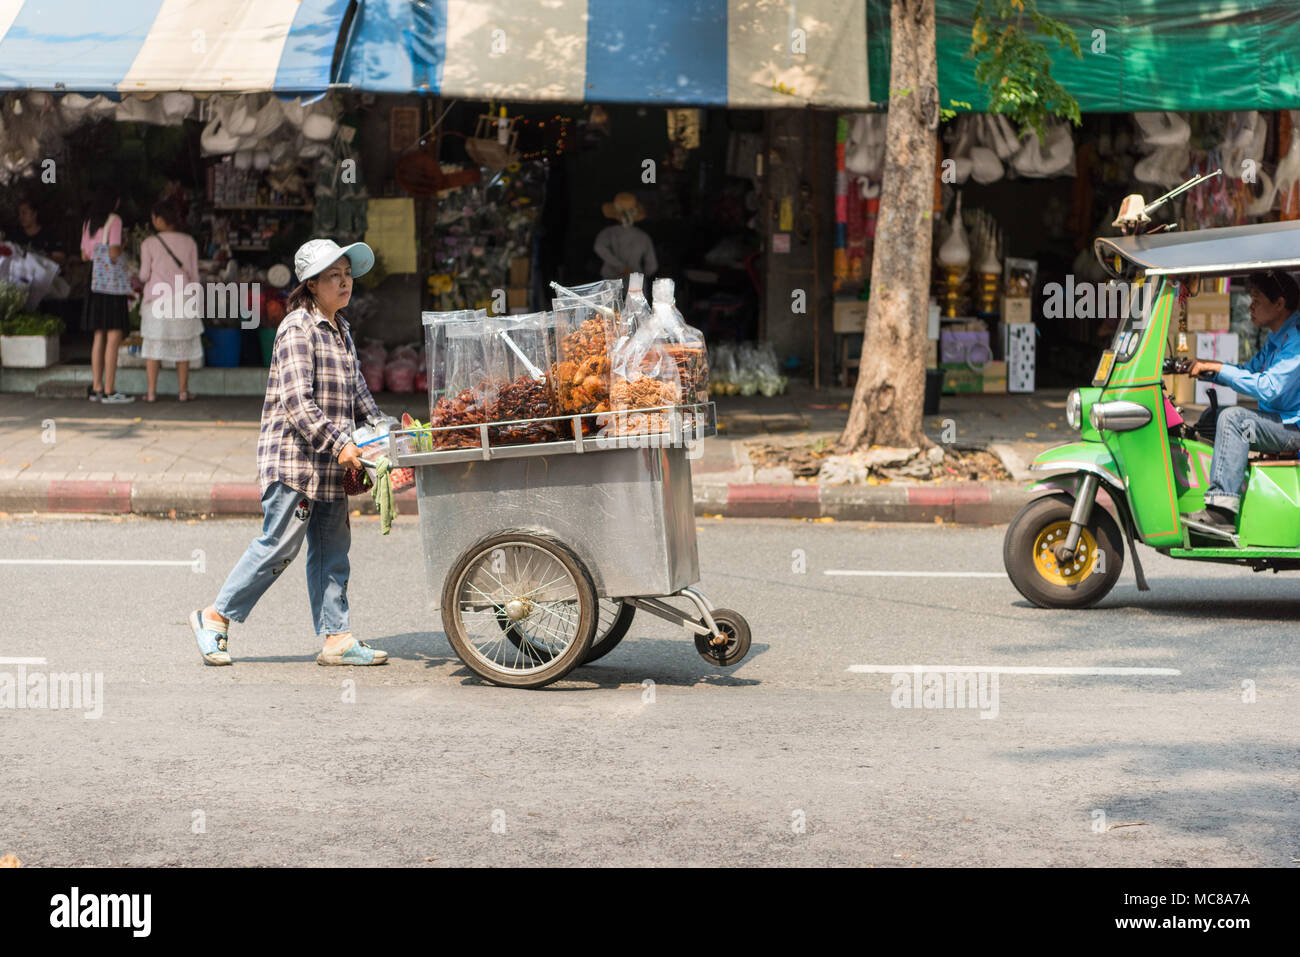 A street food vendor pushes her cart on a road in Bangkok Thailand Stock Photo